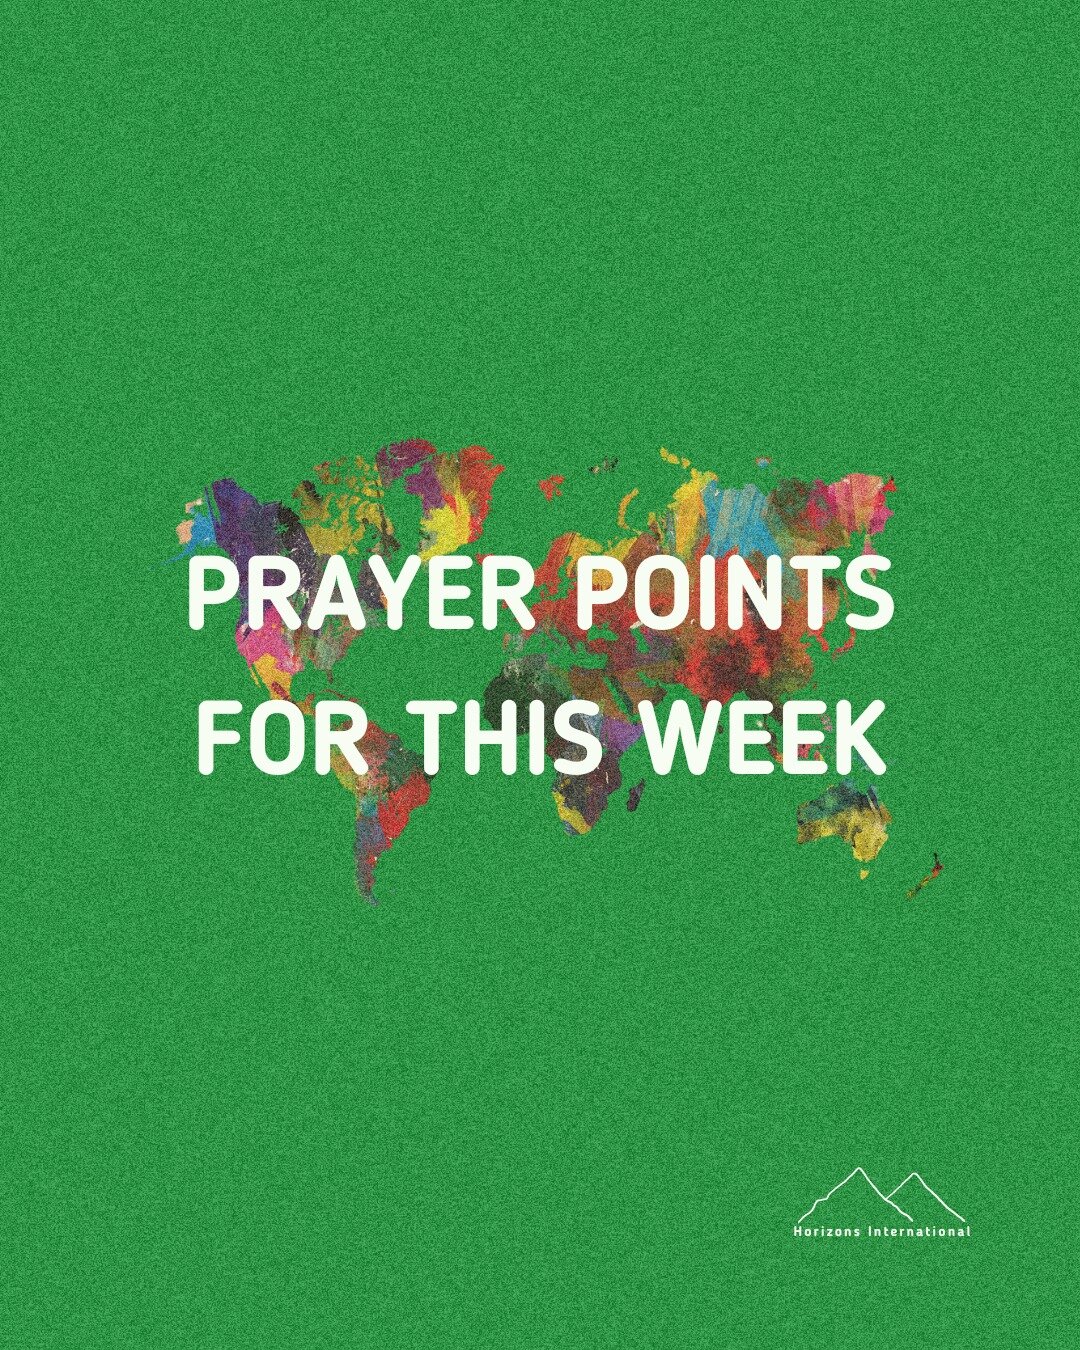 🙏🏼This week we have the opportunity to prayer strategically for Horizons International &amp; our partners. 

God is doing big things within our organization and we are so honored you have partnered with us. 

Let us know how we can pray for you as 